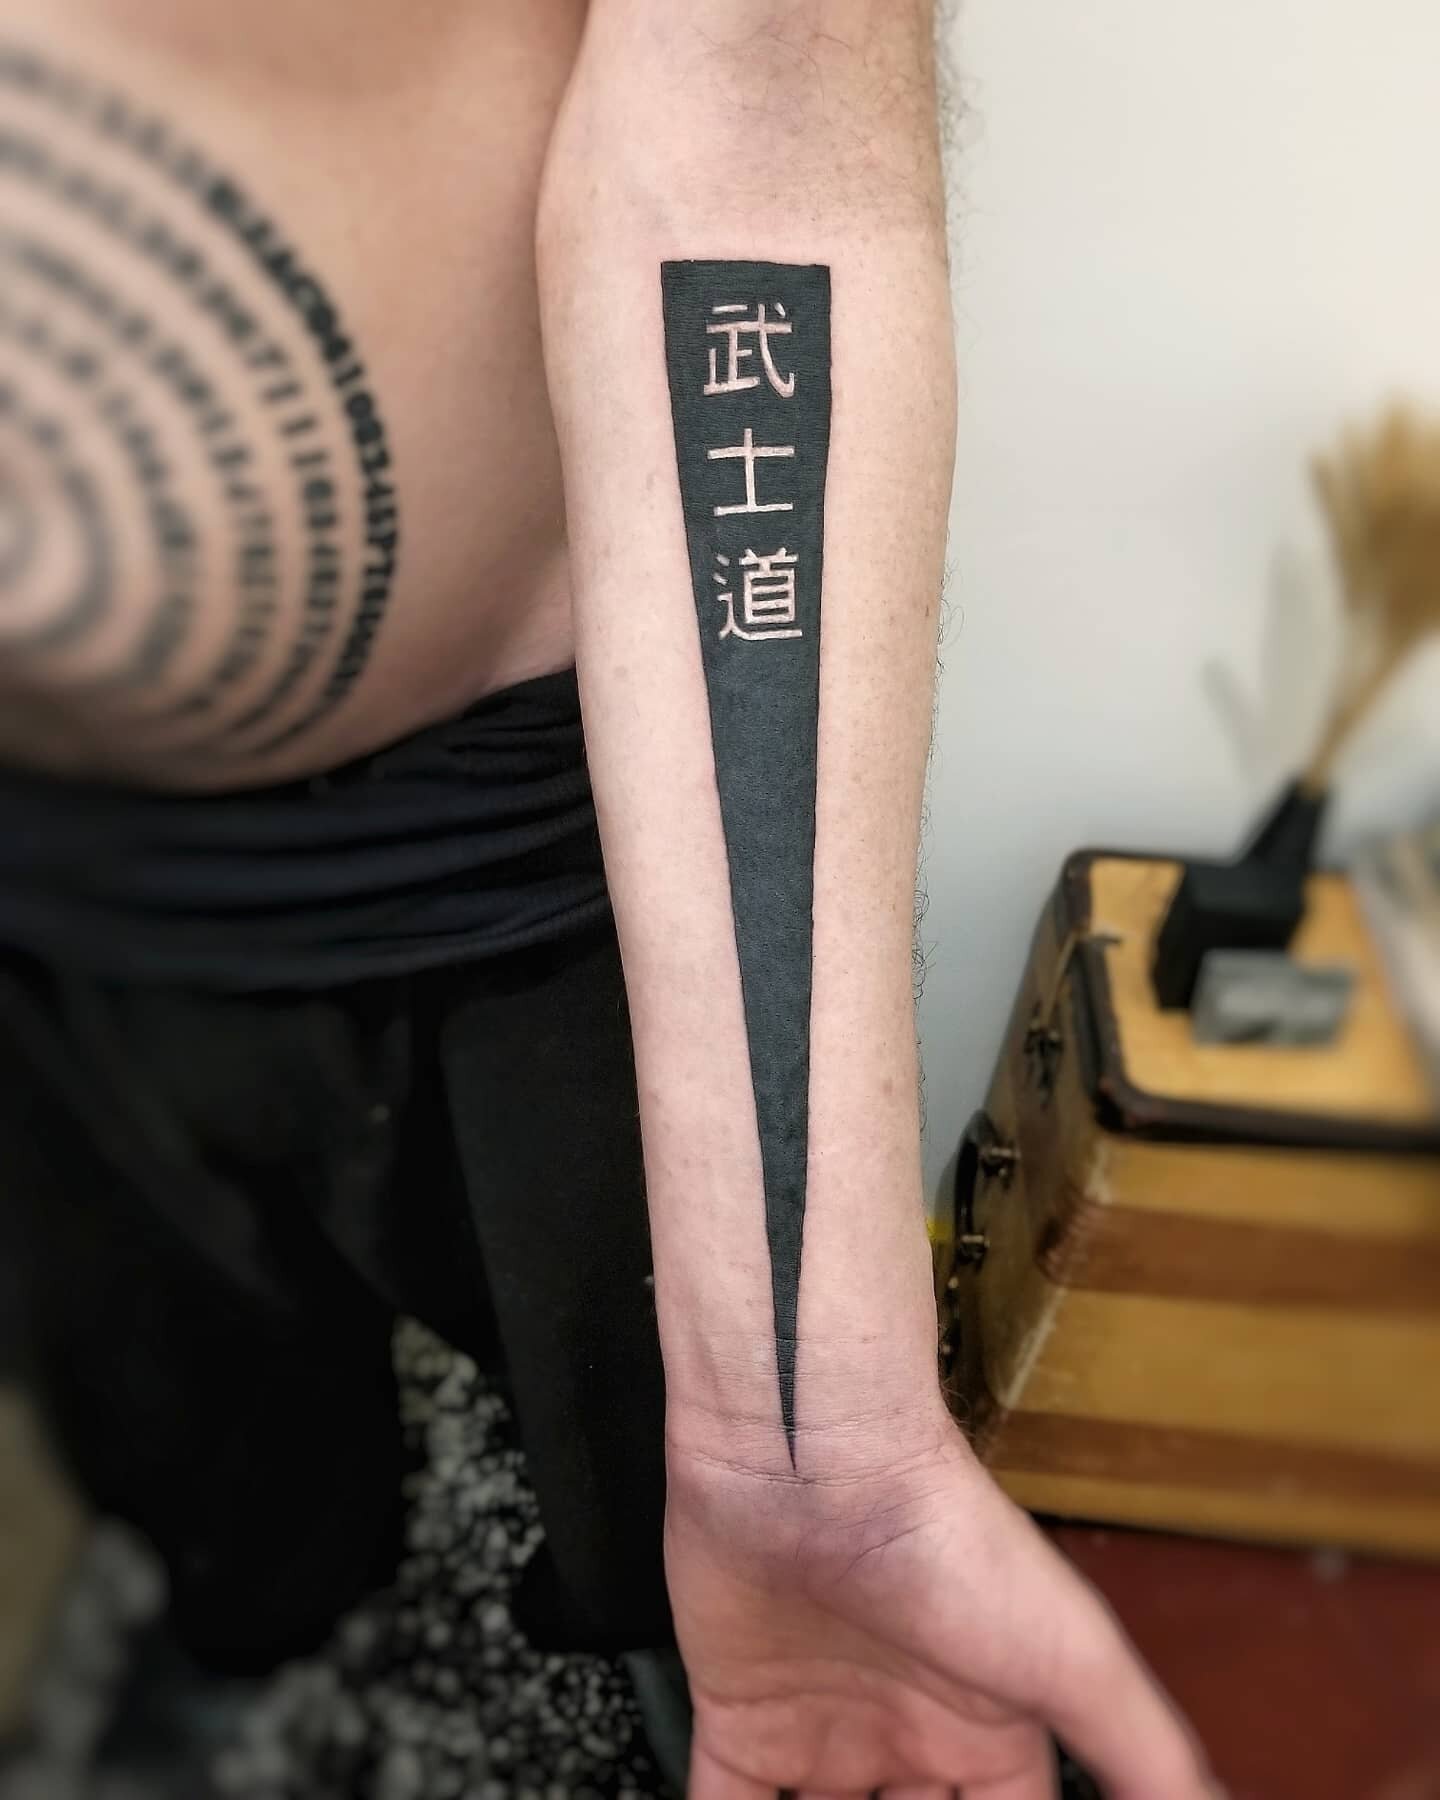 Tattoos for jujitsu sensei 
It was an honor to do these tattoos for my friend who became a sensei in jujitsu in the Japanese eizan ryu form of martial arts and these tattoos mark his becoming his sensei after his 3rd black belt.

Left arm: bushido
Ri